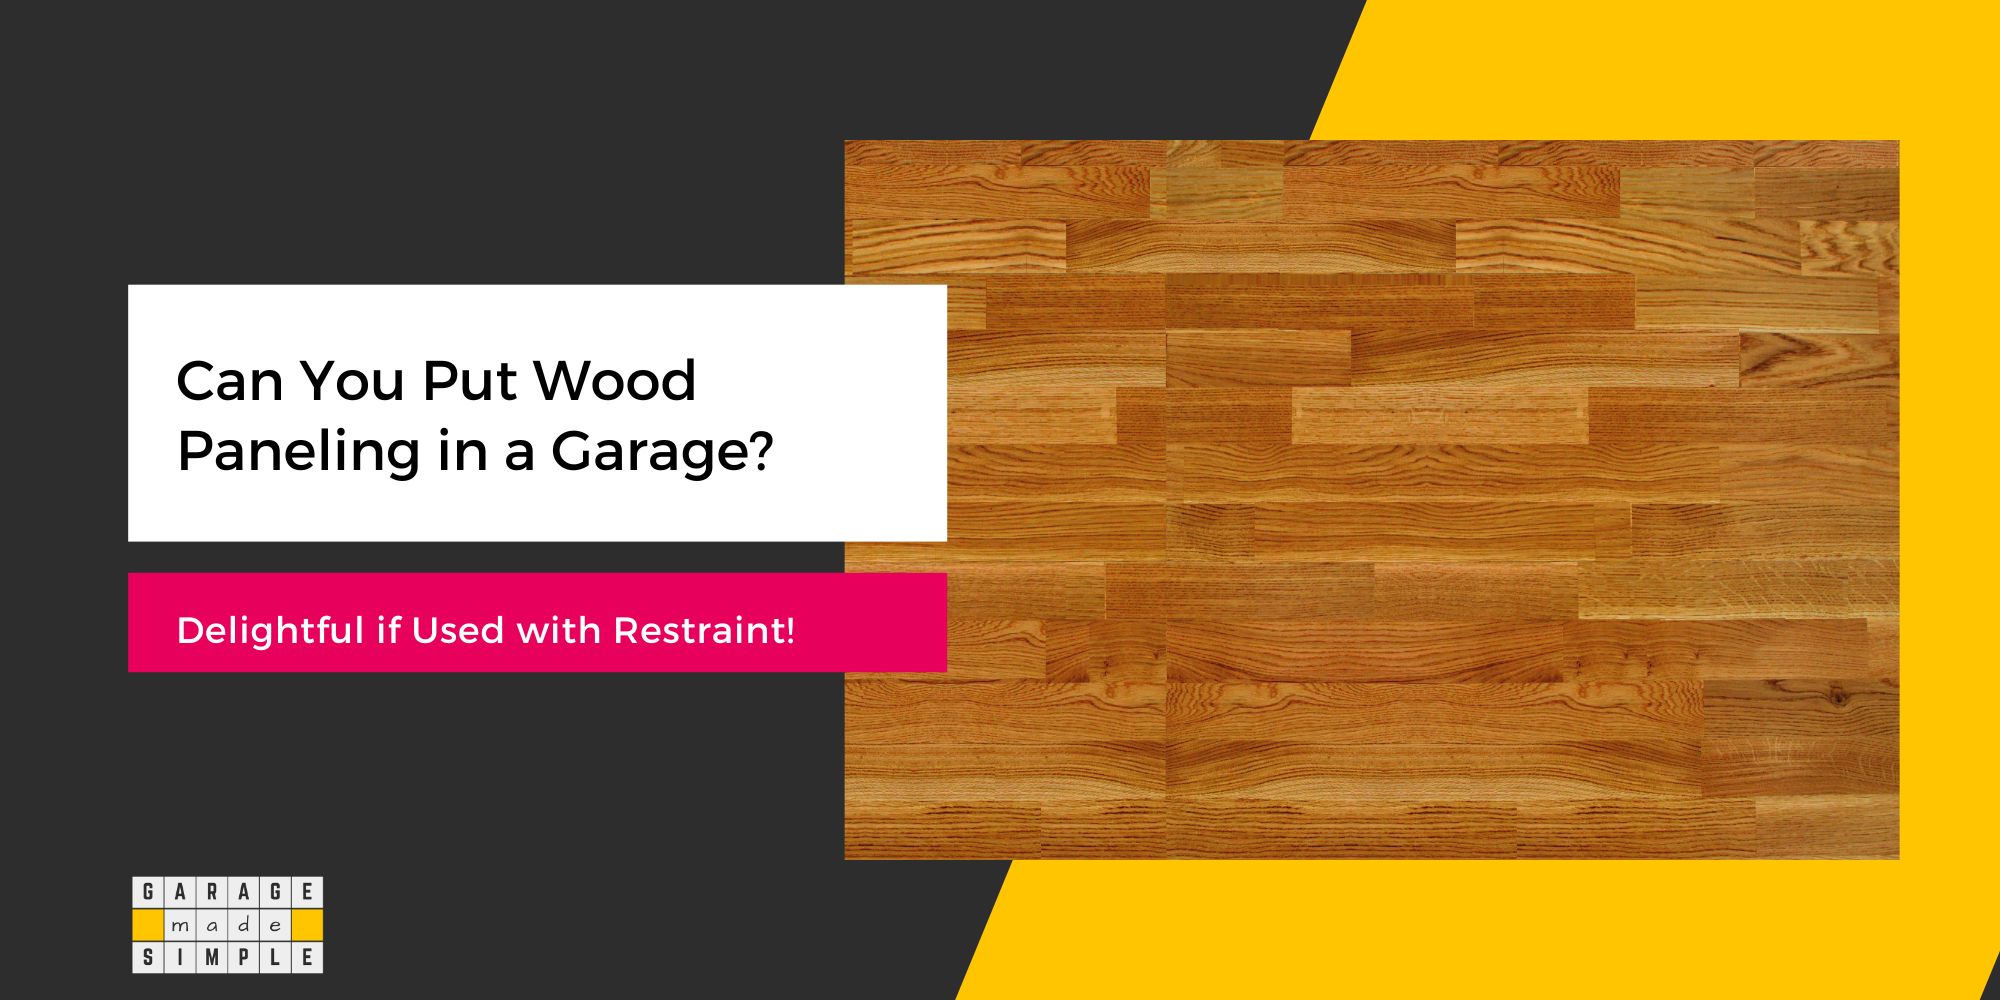 Wood Paneling in a Garage? (Delightful When Used with Restraint!)